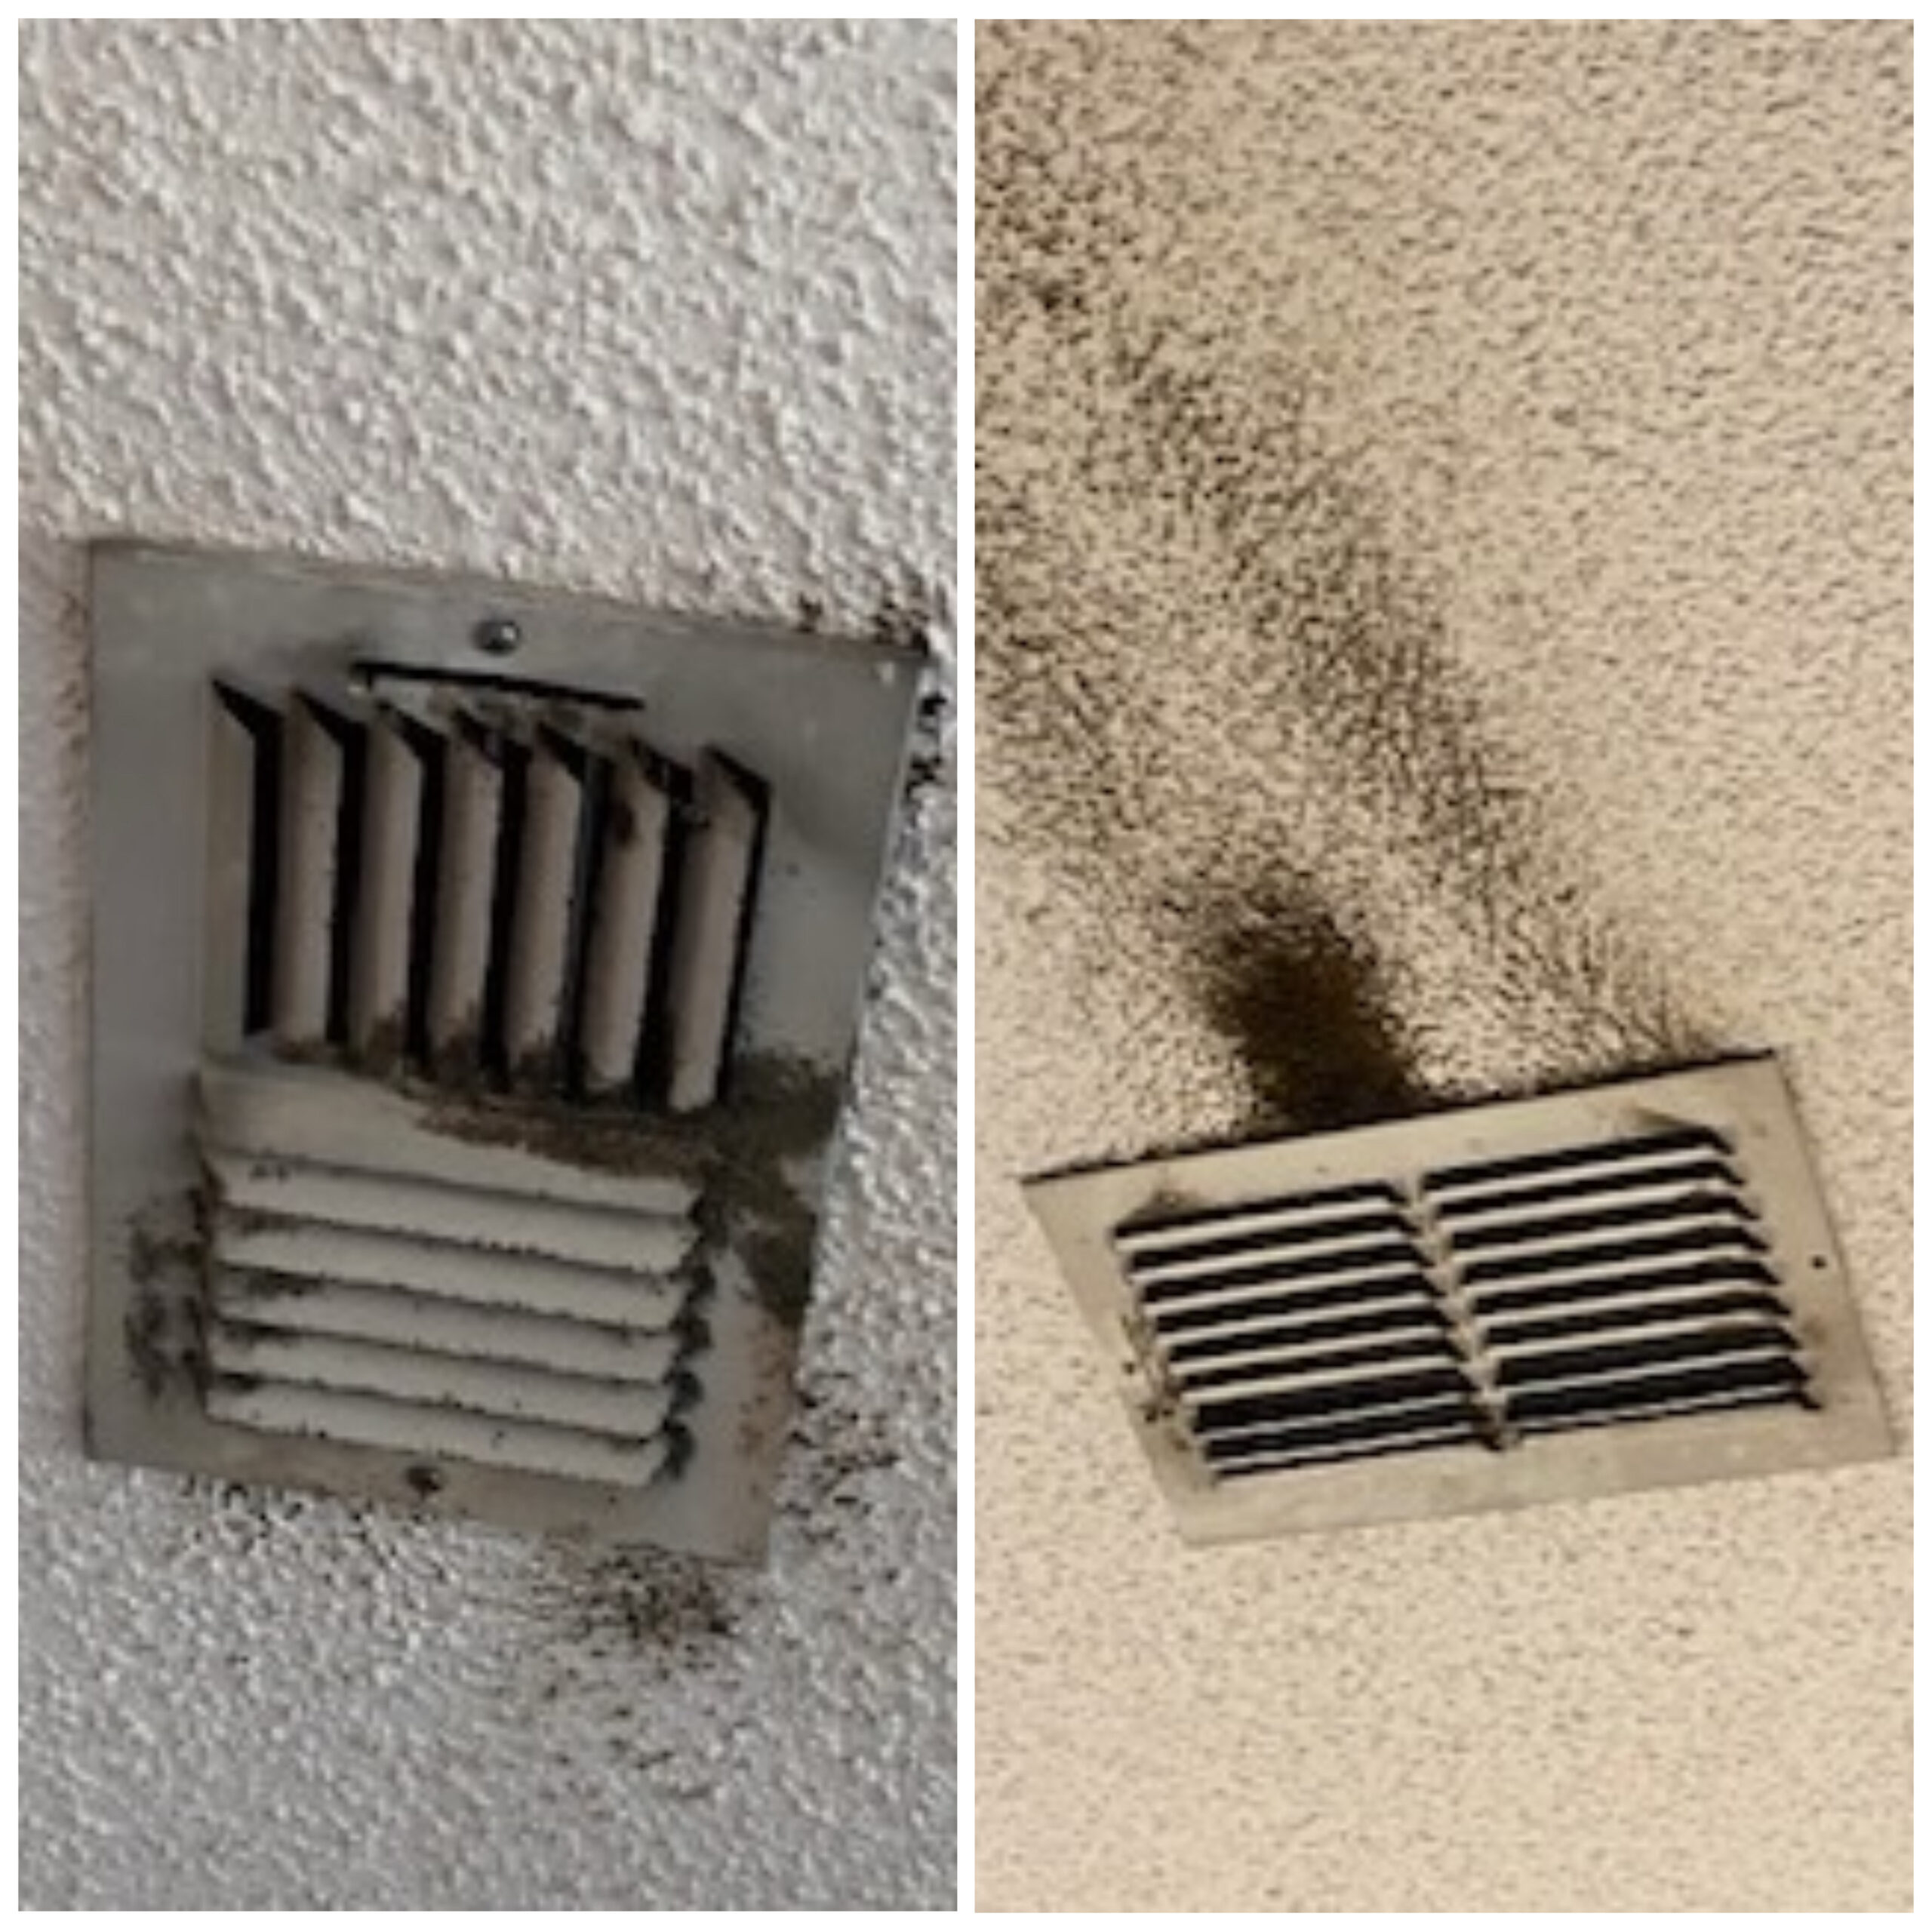 Black Spots on Vent Might Be Mold - Mr. Duct Cleaner